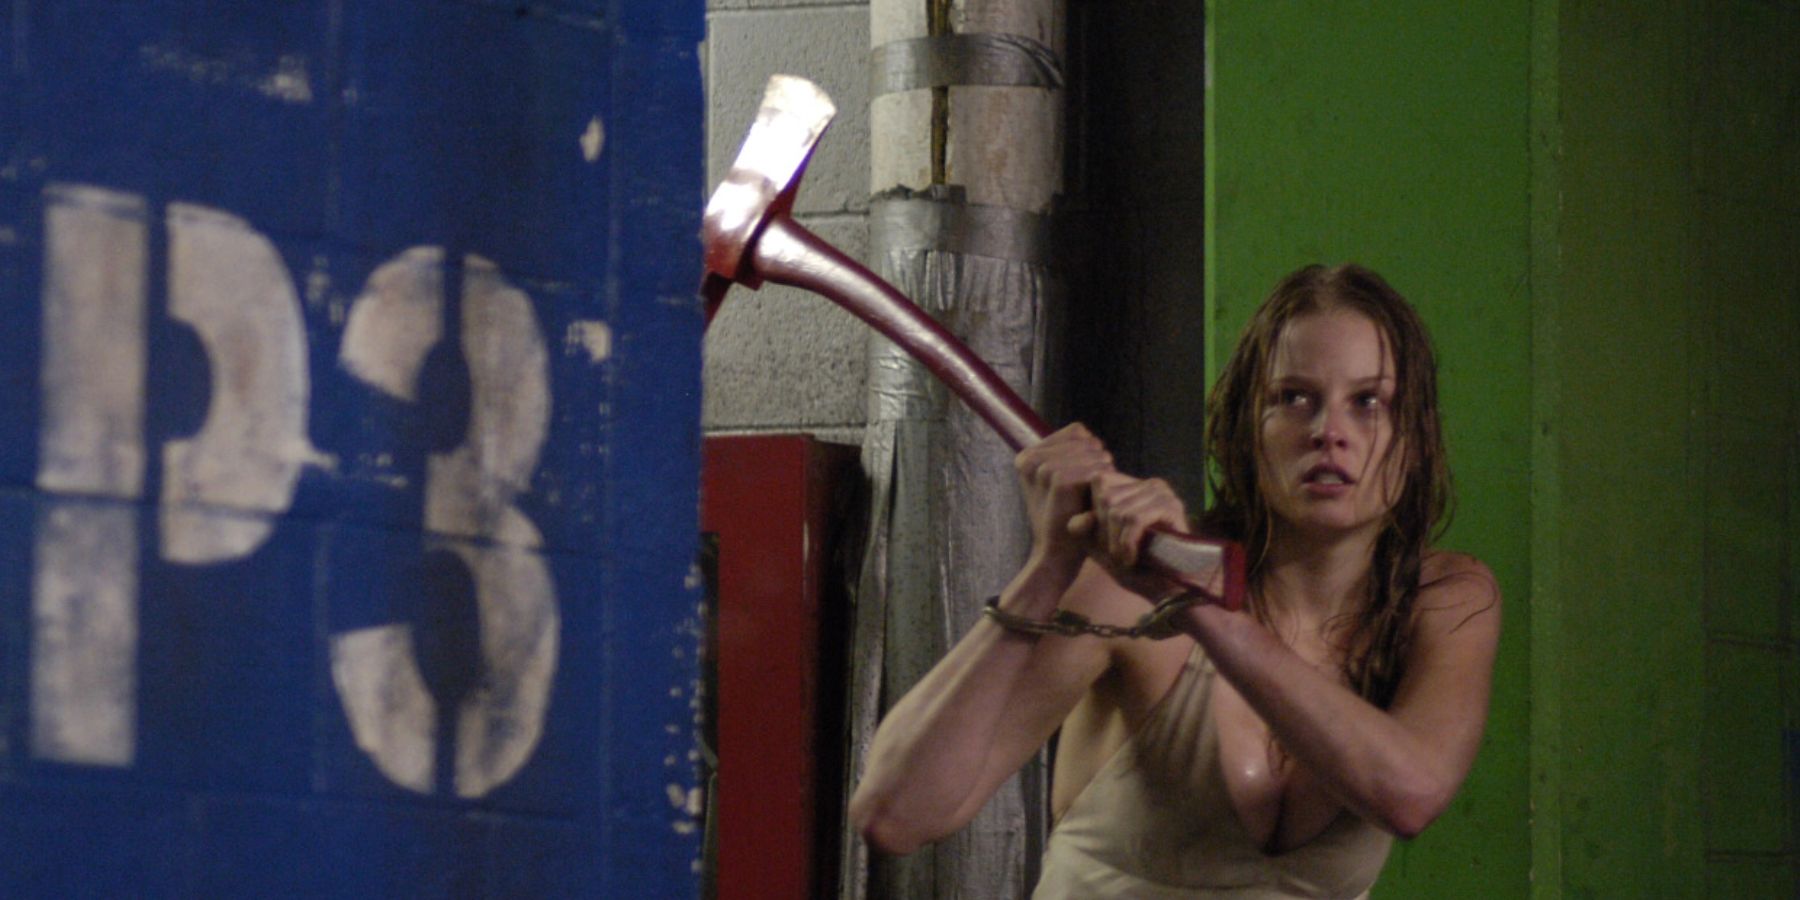 Rachel Nichols holds an ax above her head in the parking garage in P2